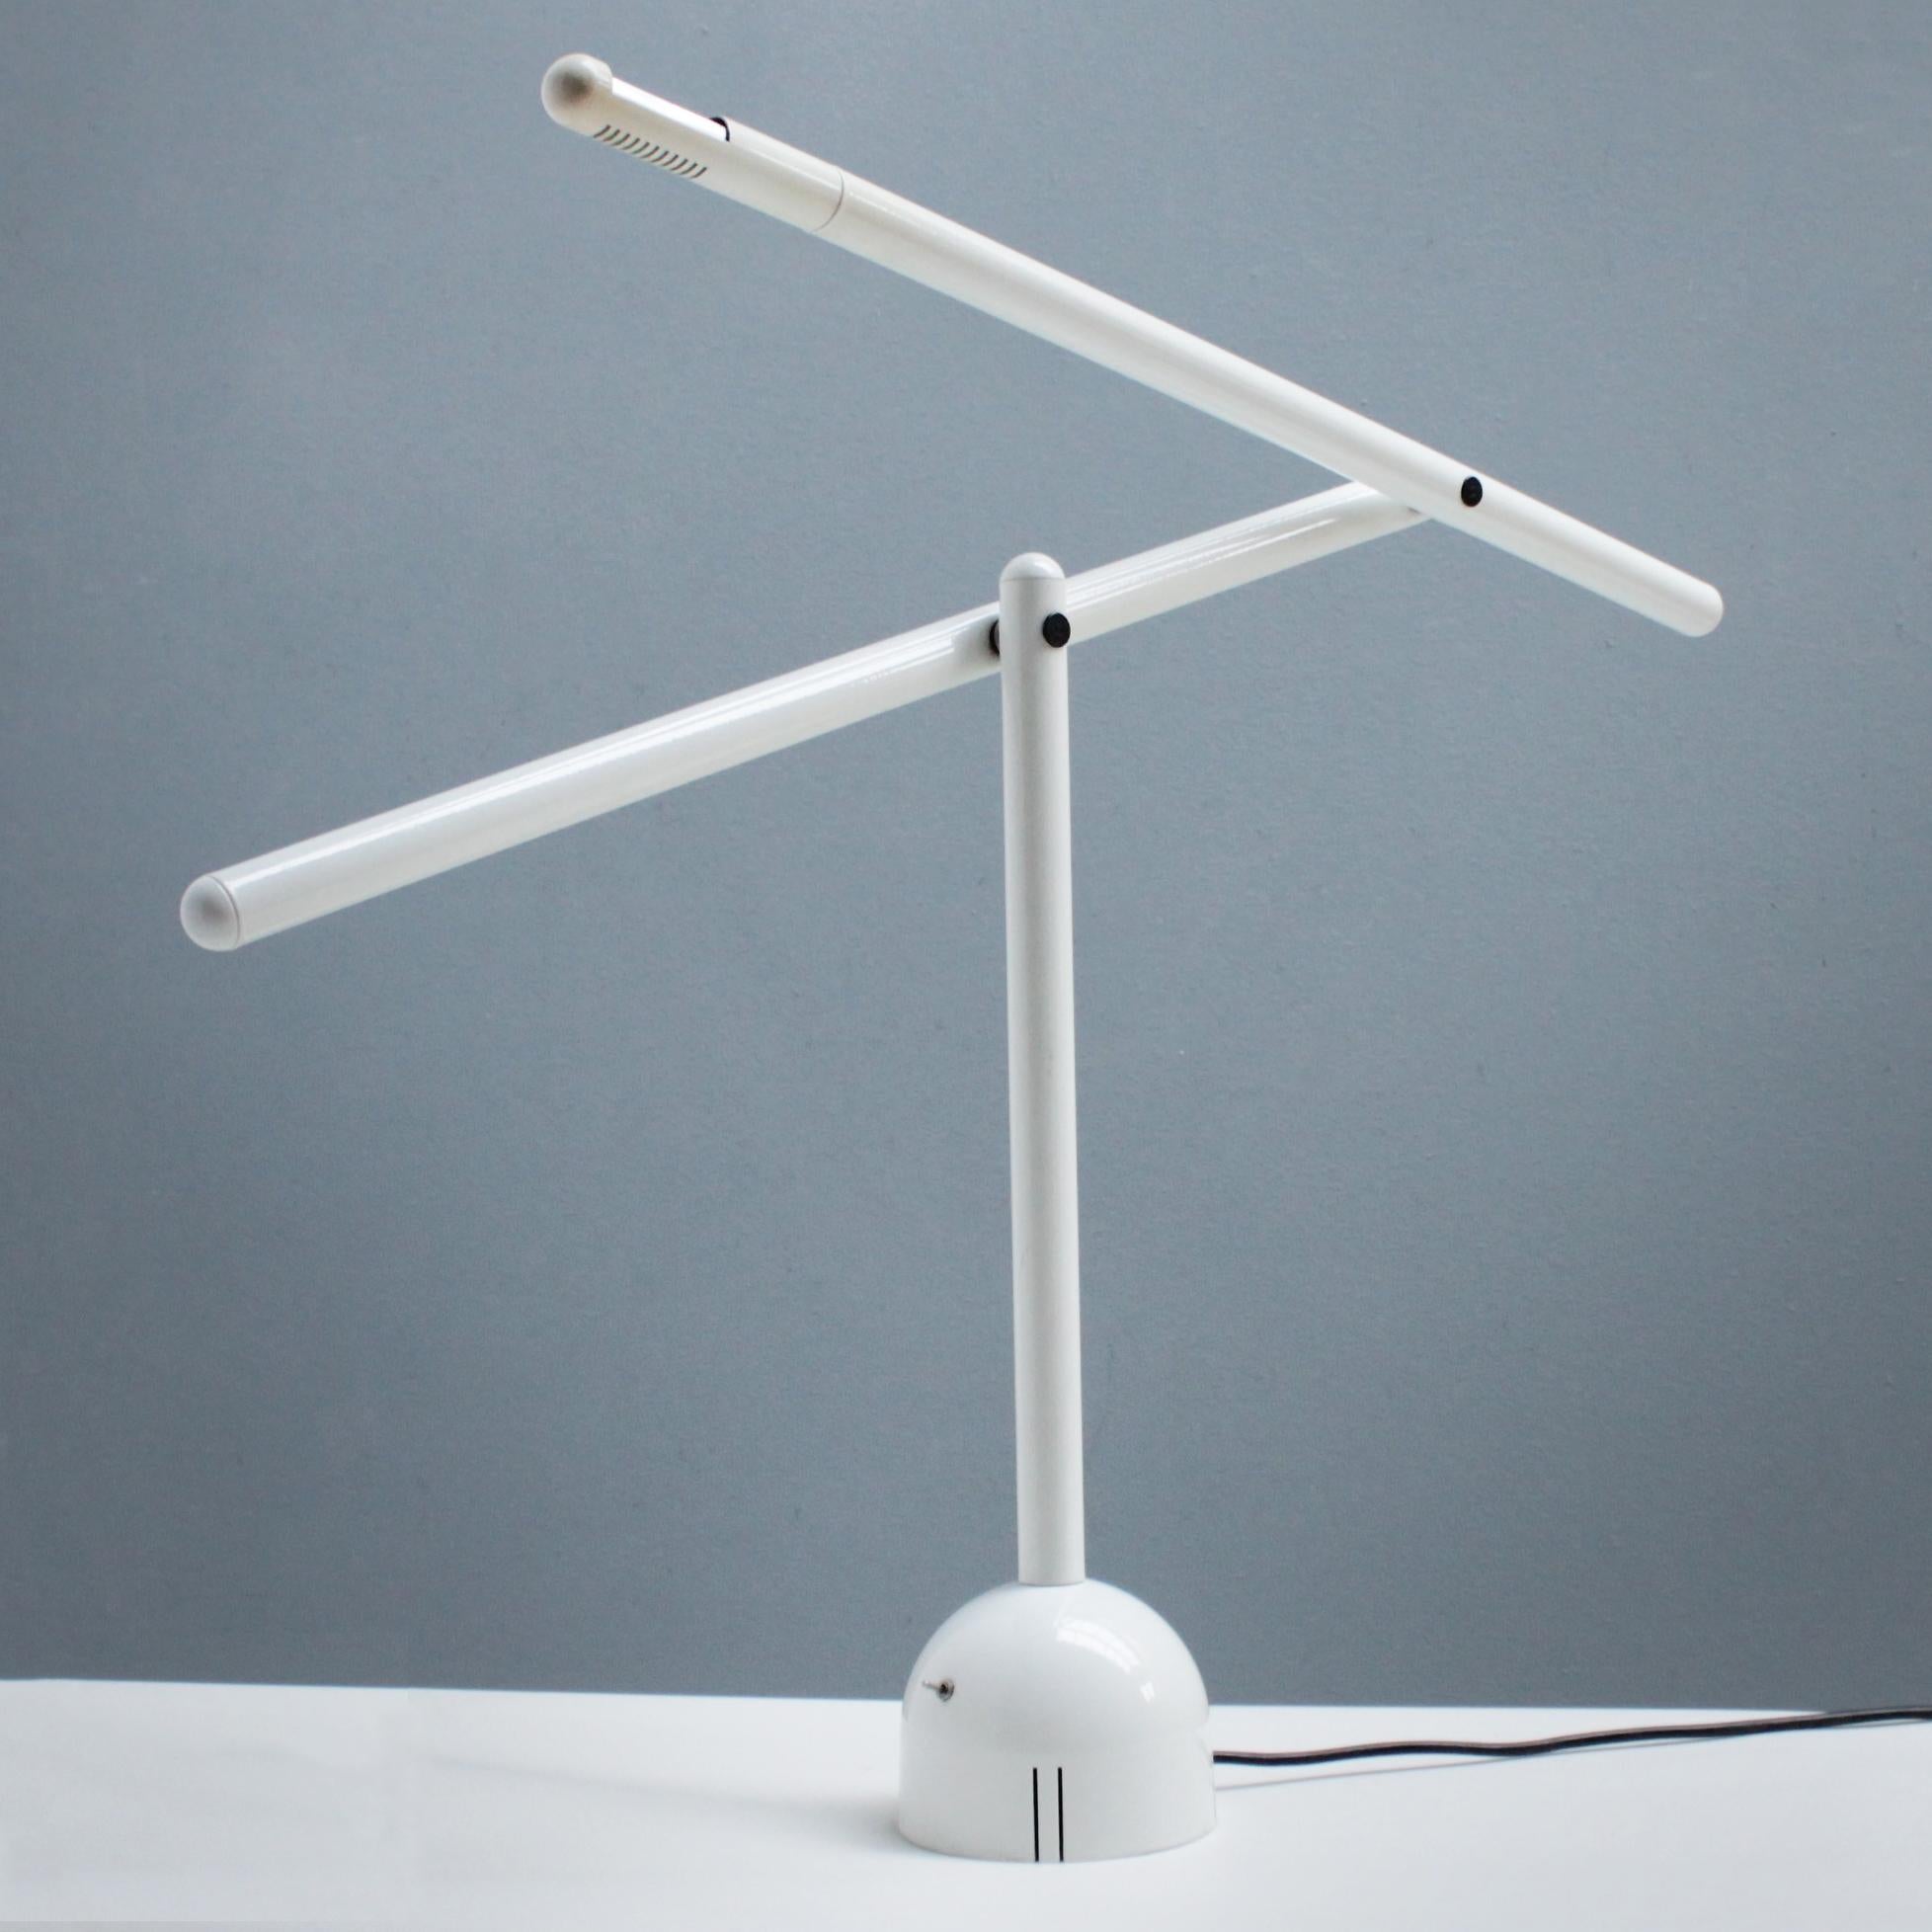 Articulated Italian Mira table lamp by Mario Arnaboldi for Programmaluce, in white enameled metal. Dimensions: height 21.3 (54 cm), width 32.3 in. (82 cm), depth 5.9 inches (15 cm). Diameter base 5.9 inches (15 cm). The lamp takes a G9 halogen